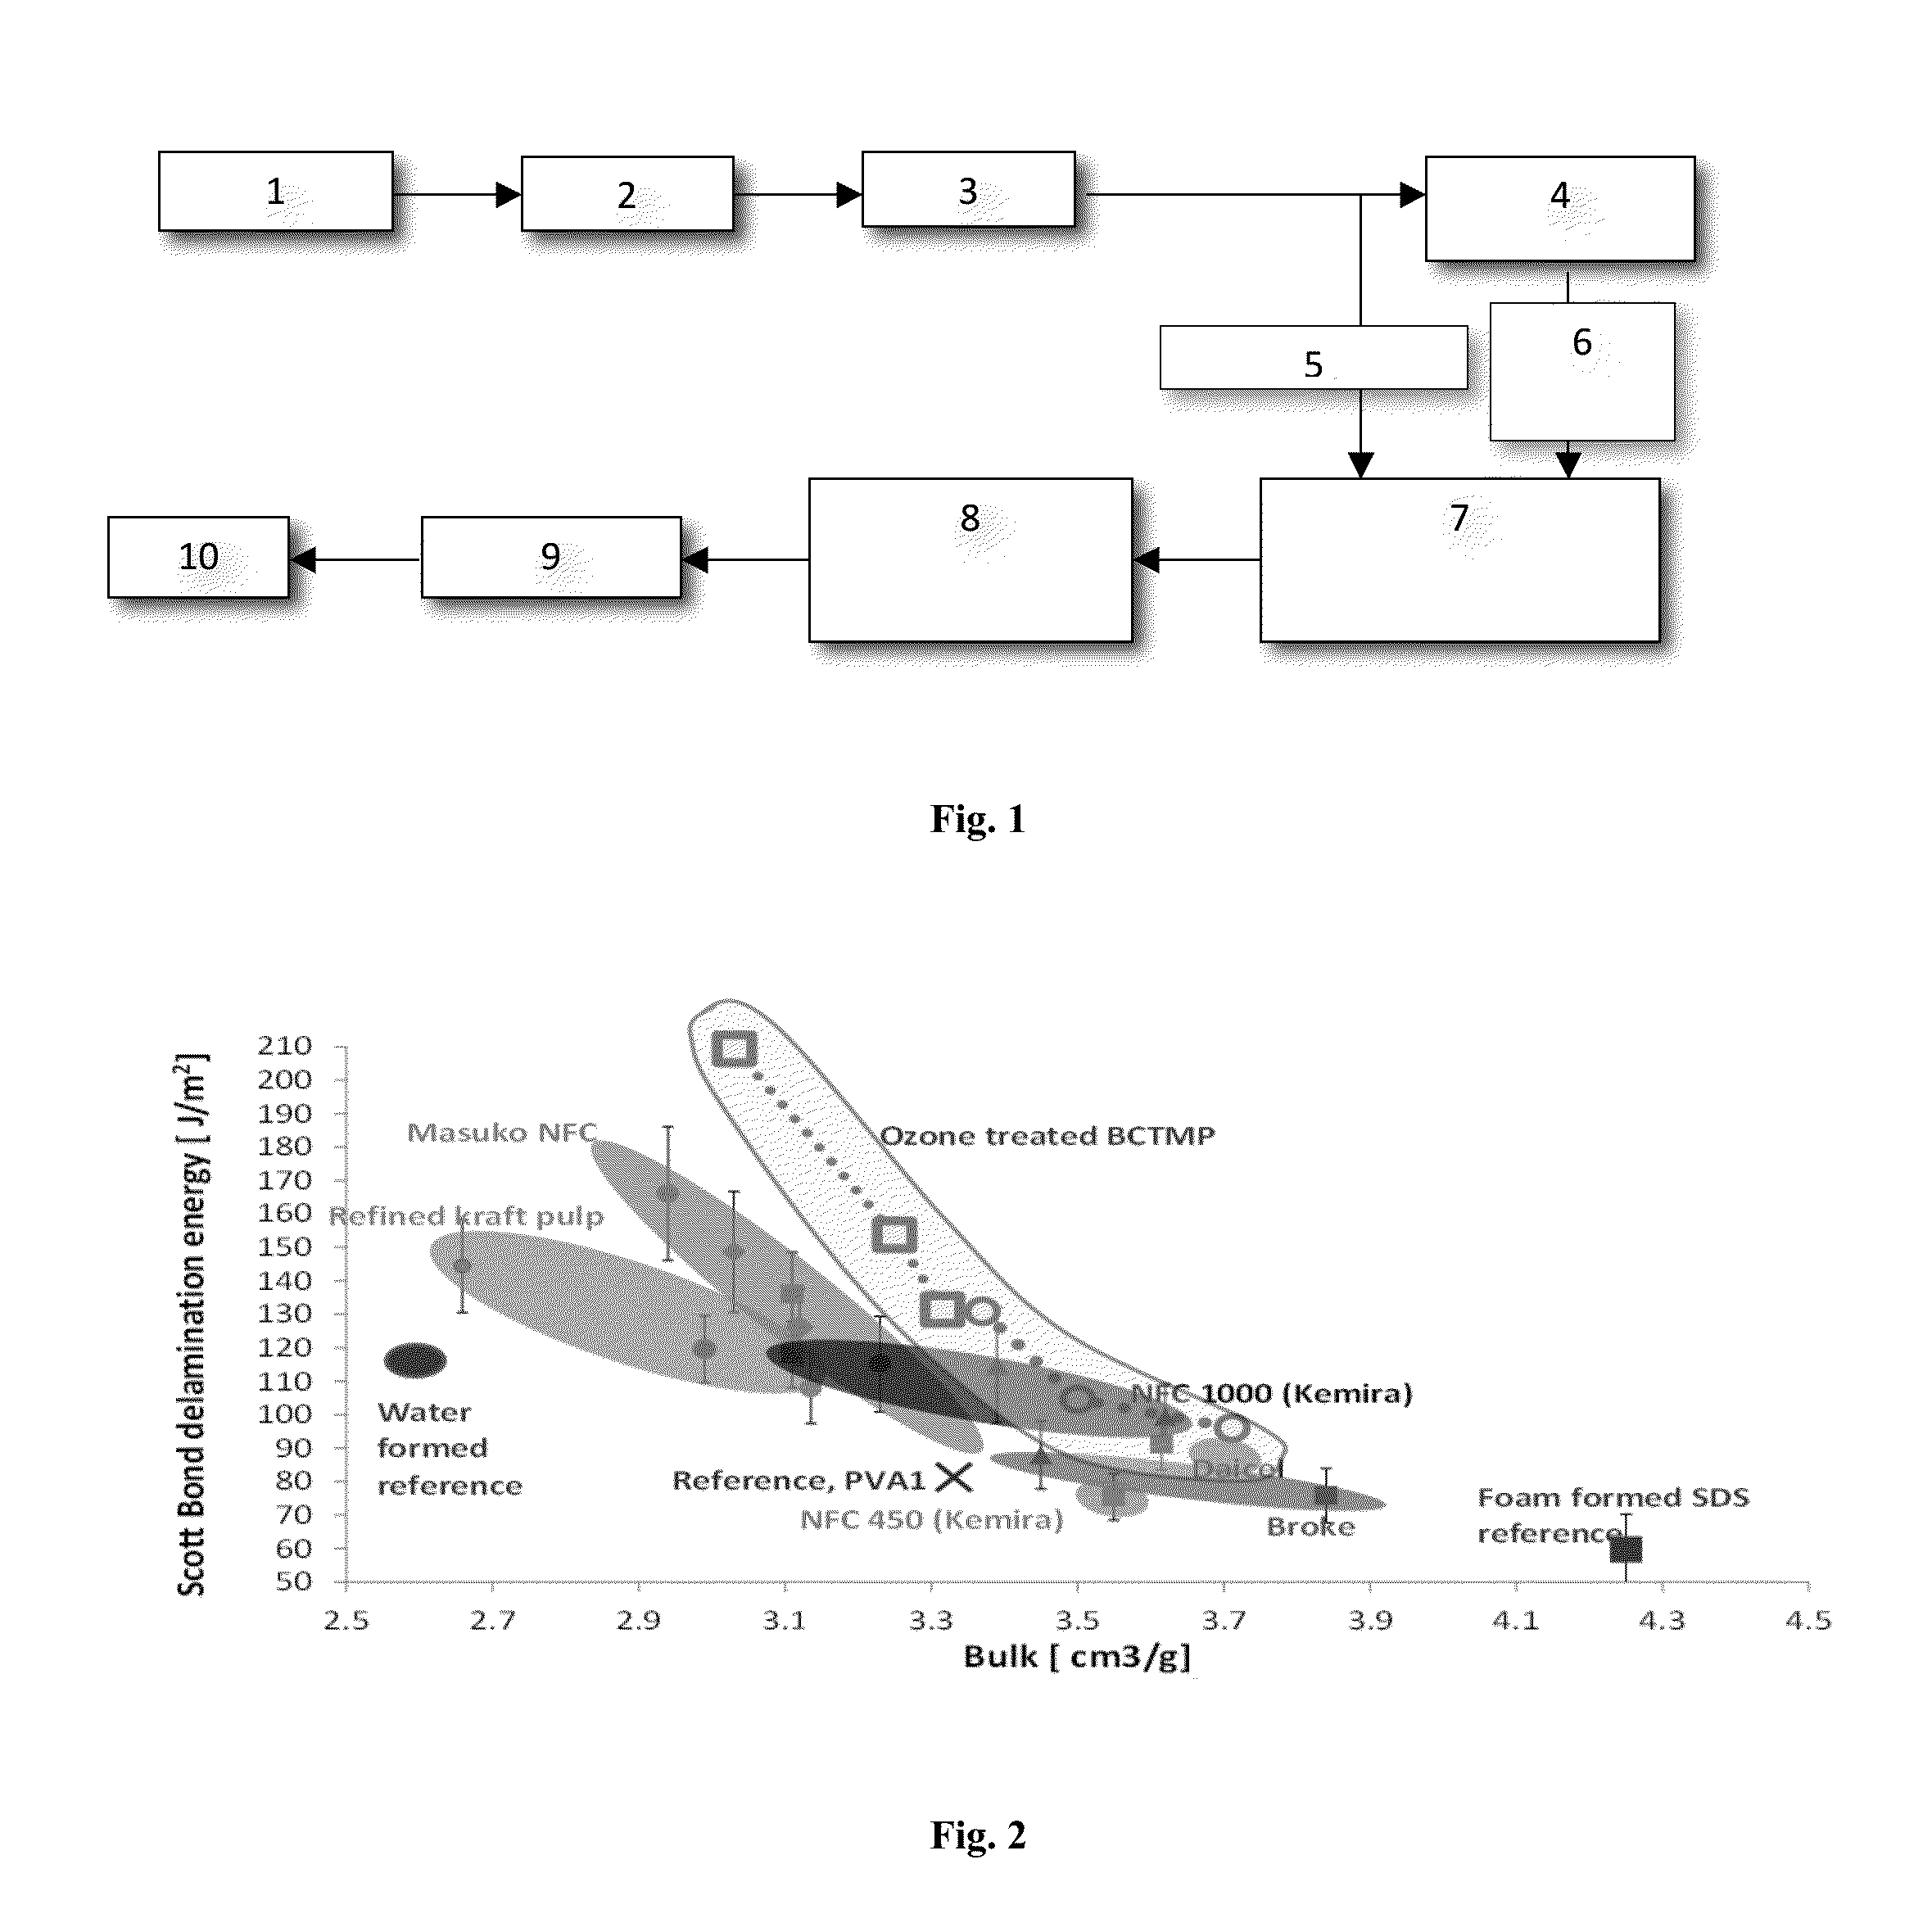 Fibrous product and method of producing fibrous web